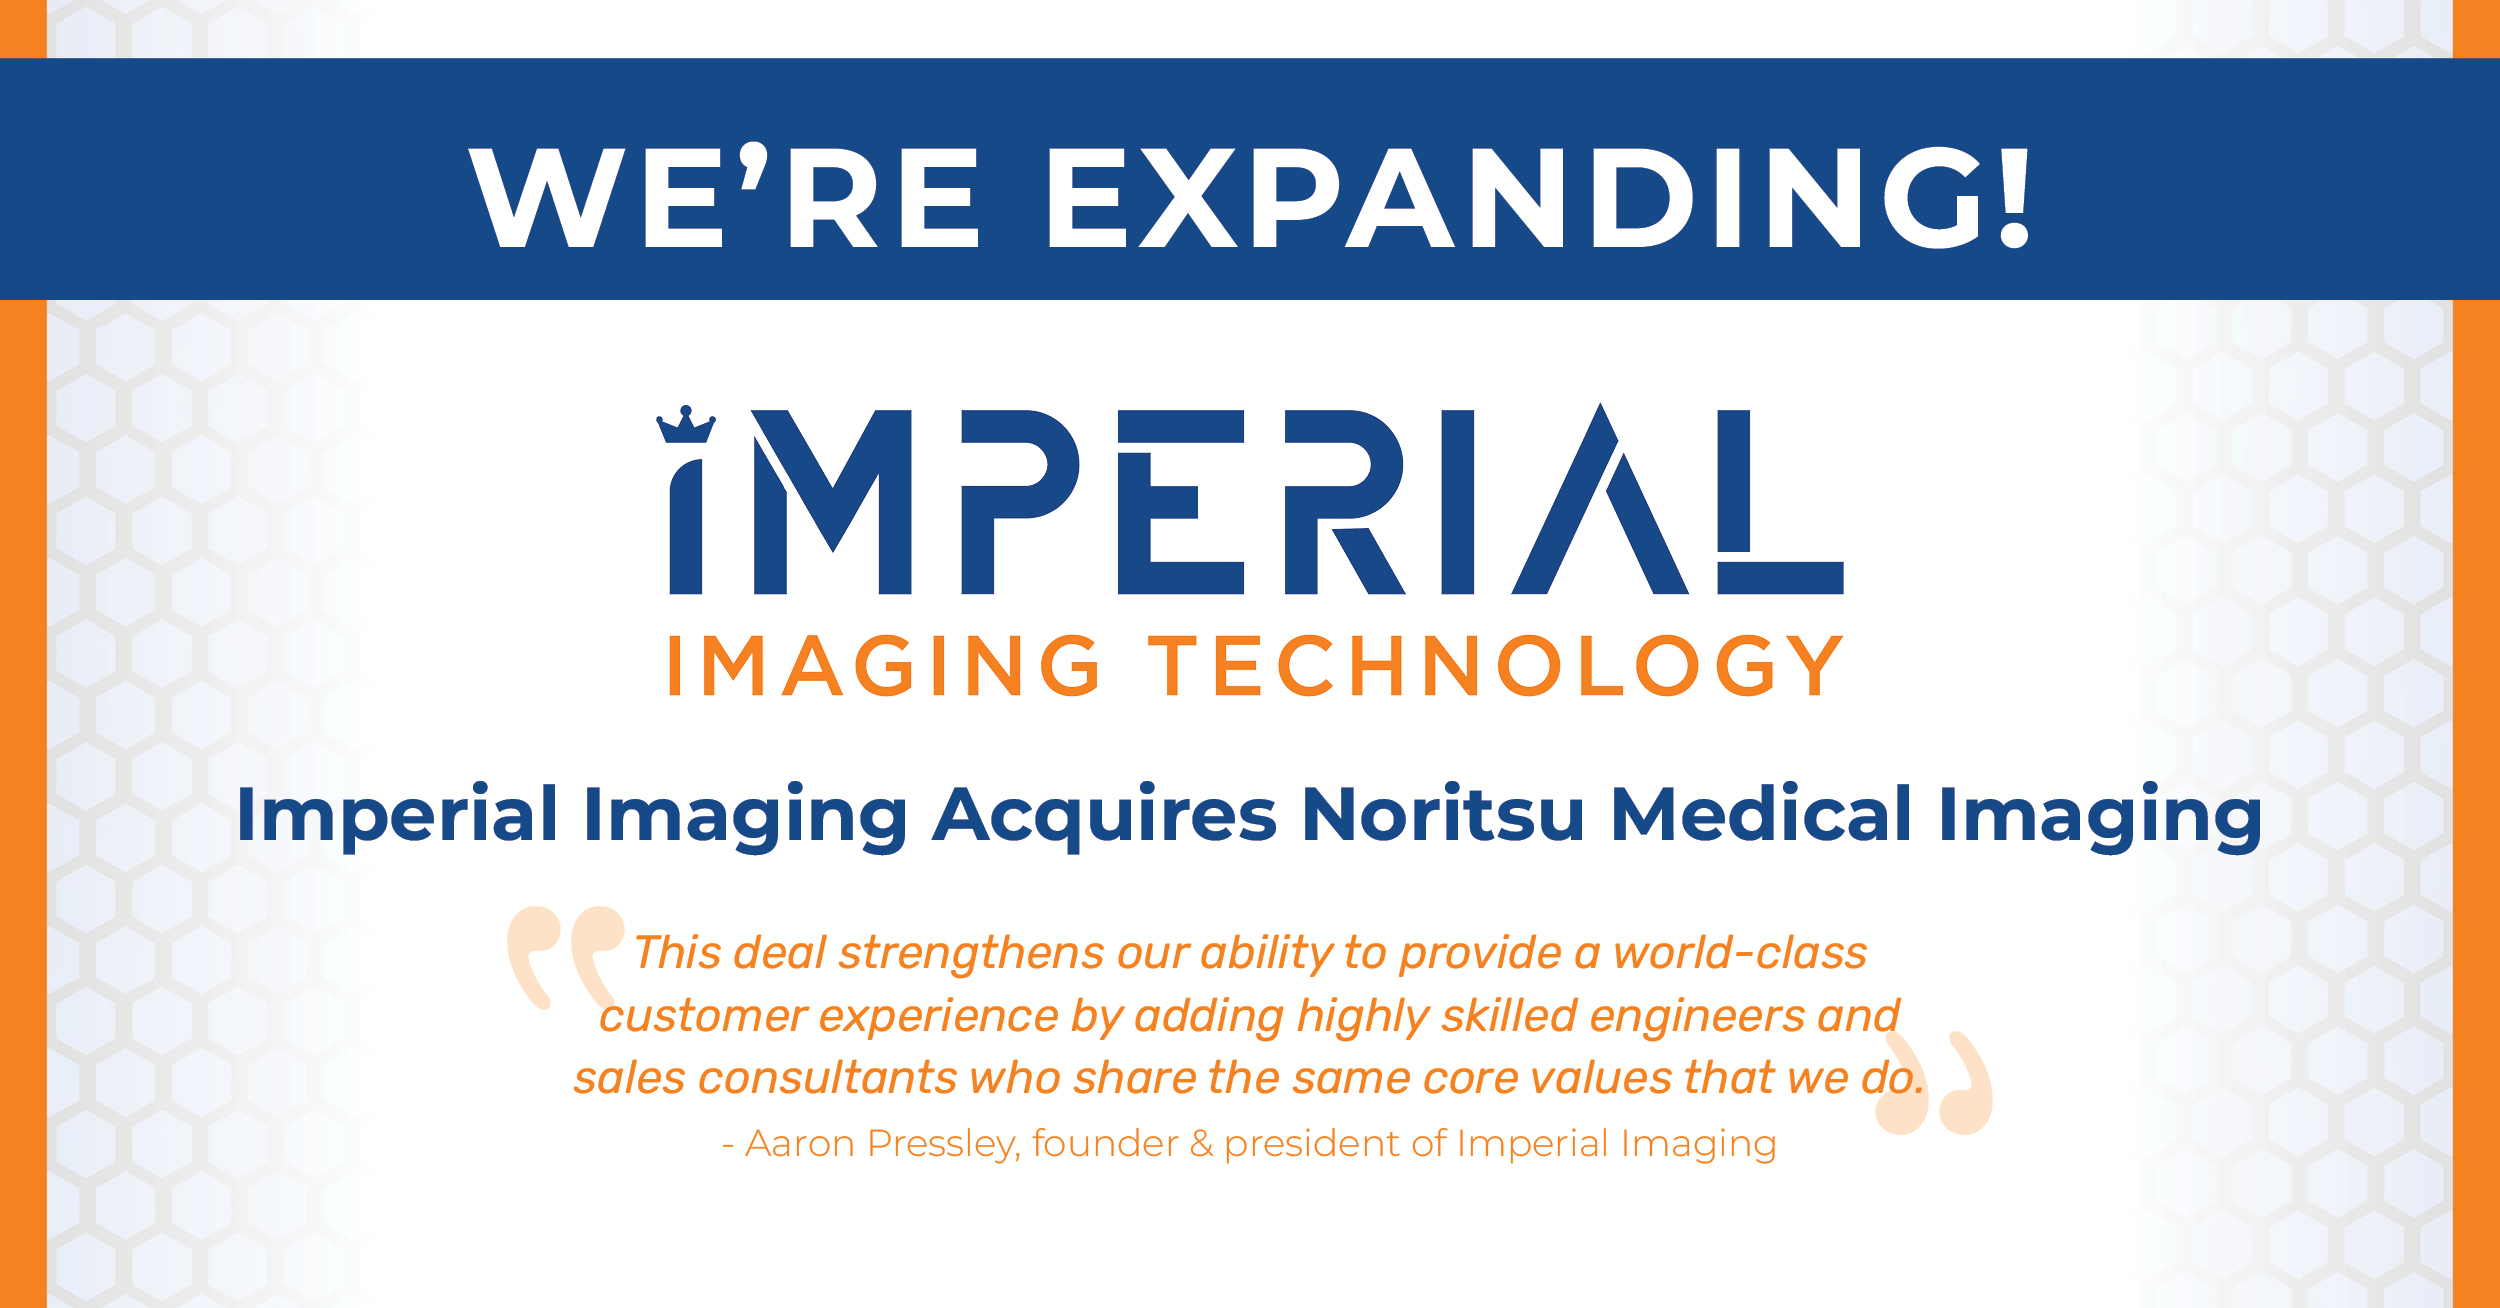 Imperial Imaging Technology Acquires Noritsu Medical Imaging